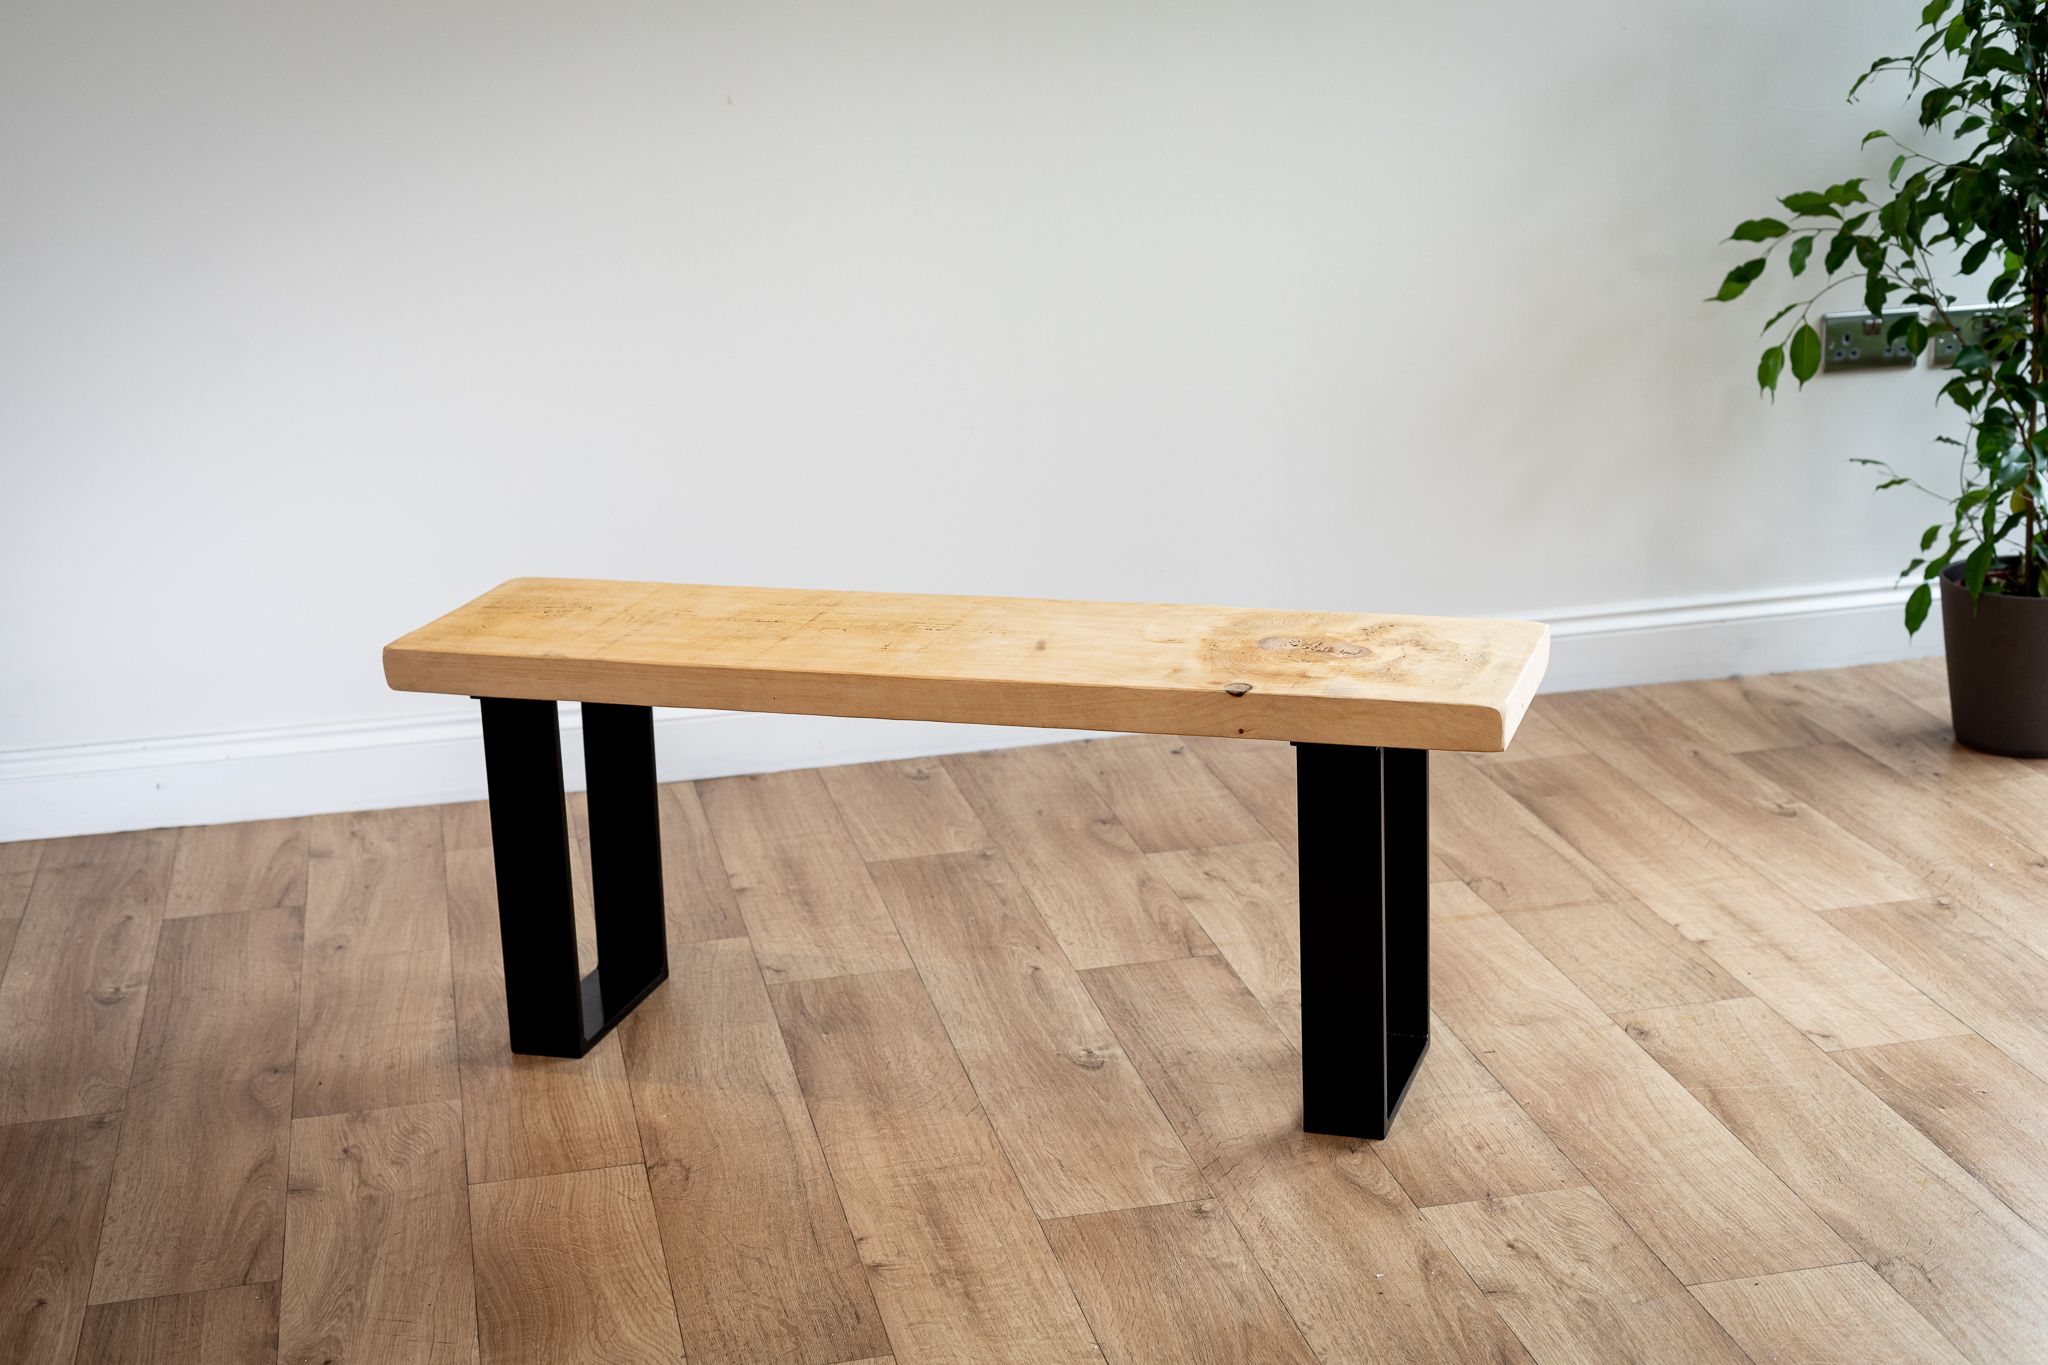 Rustic Wood Top Bench, With Black Metal Flat Bar Frame | Fabulous With Matte Black Metal Desks (View 10 of 15)